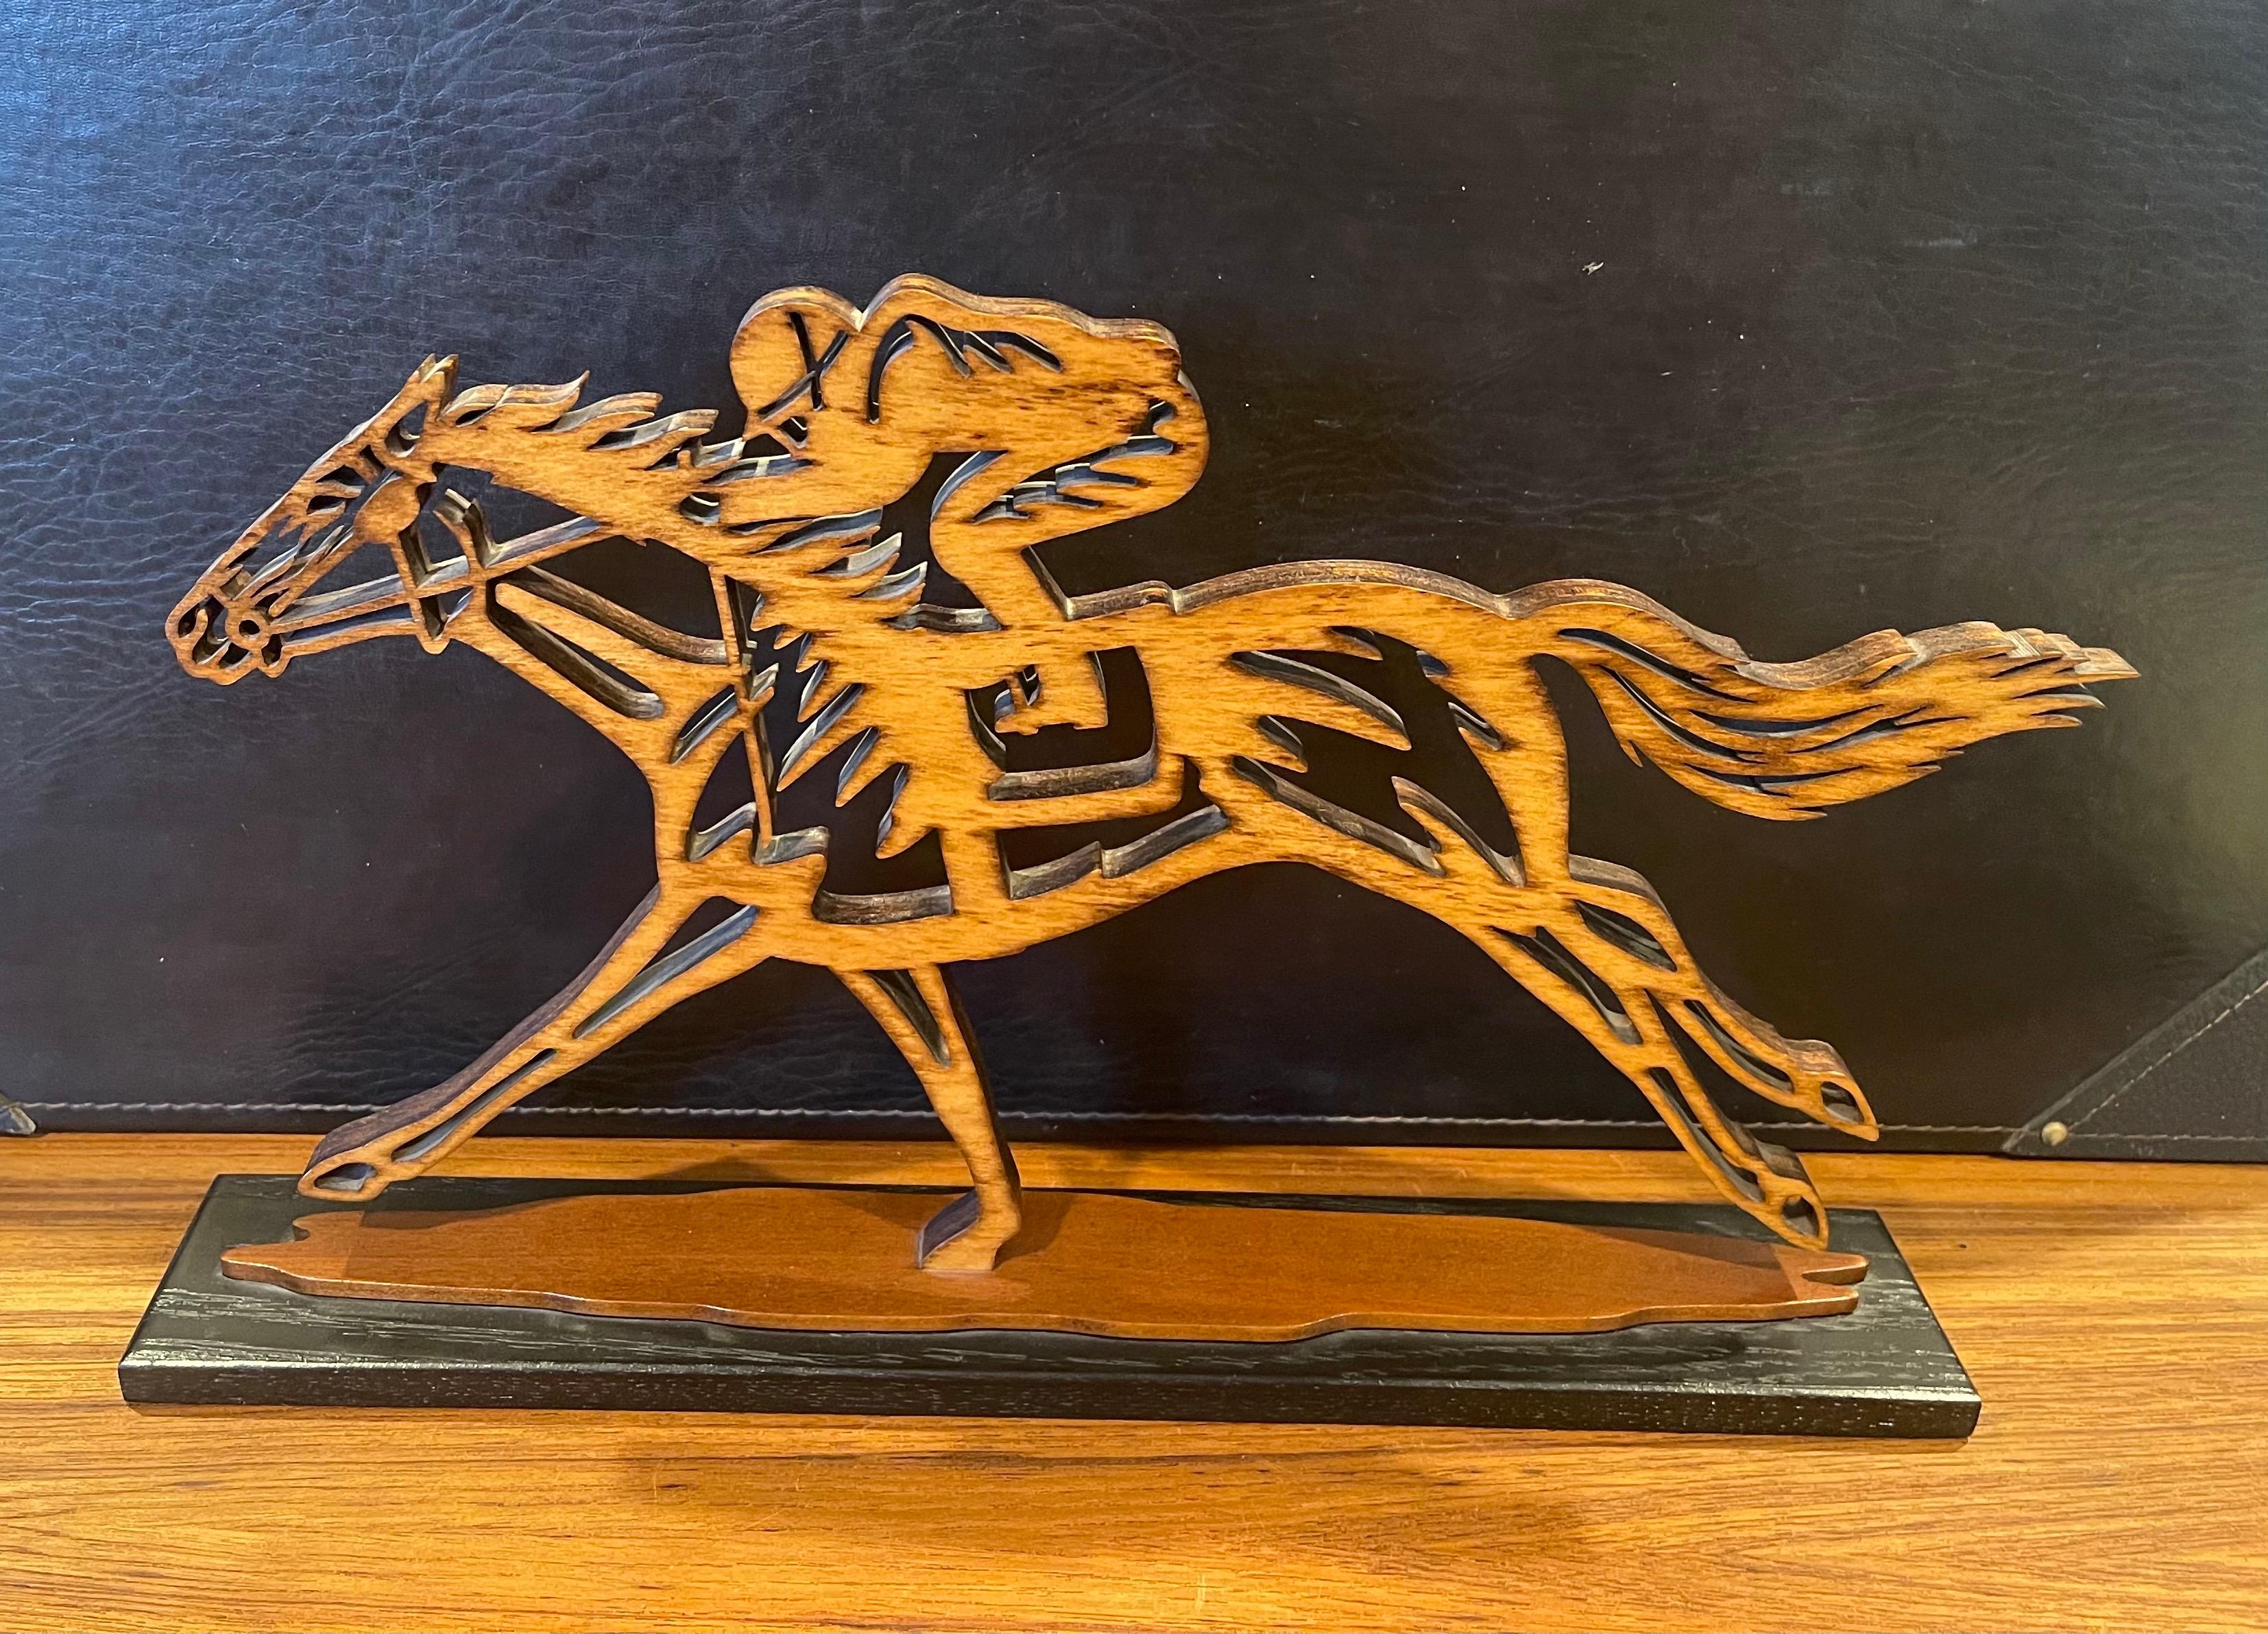 Wonderful carved wood sculpture of a thoroughbred horses racing with jockey aboard, circa 1990s. Great detail and patina on wood base! The piece is in very good condition and measures 2.5